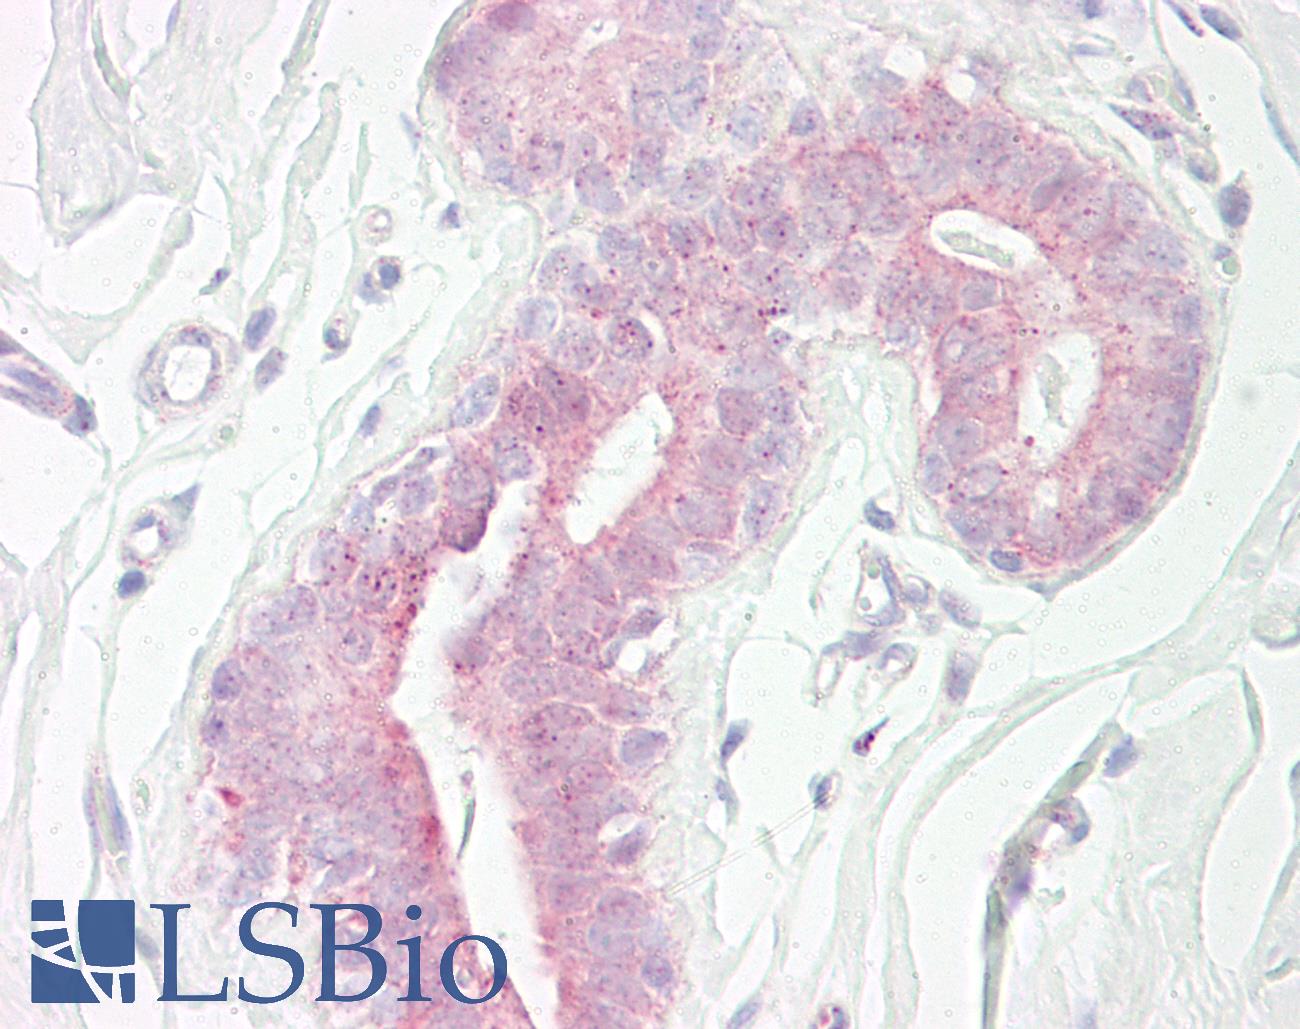 RPS6KB1 / P70S6K / S6K Antibody - Anti-RPS6KB1 / S6K antibody IHC of human breast. Immunohistochemistry of formalin-fixed, paraffin-embedded tissue after heat-induced antigen retrieval. Antibody dilution 1:100.